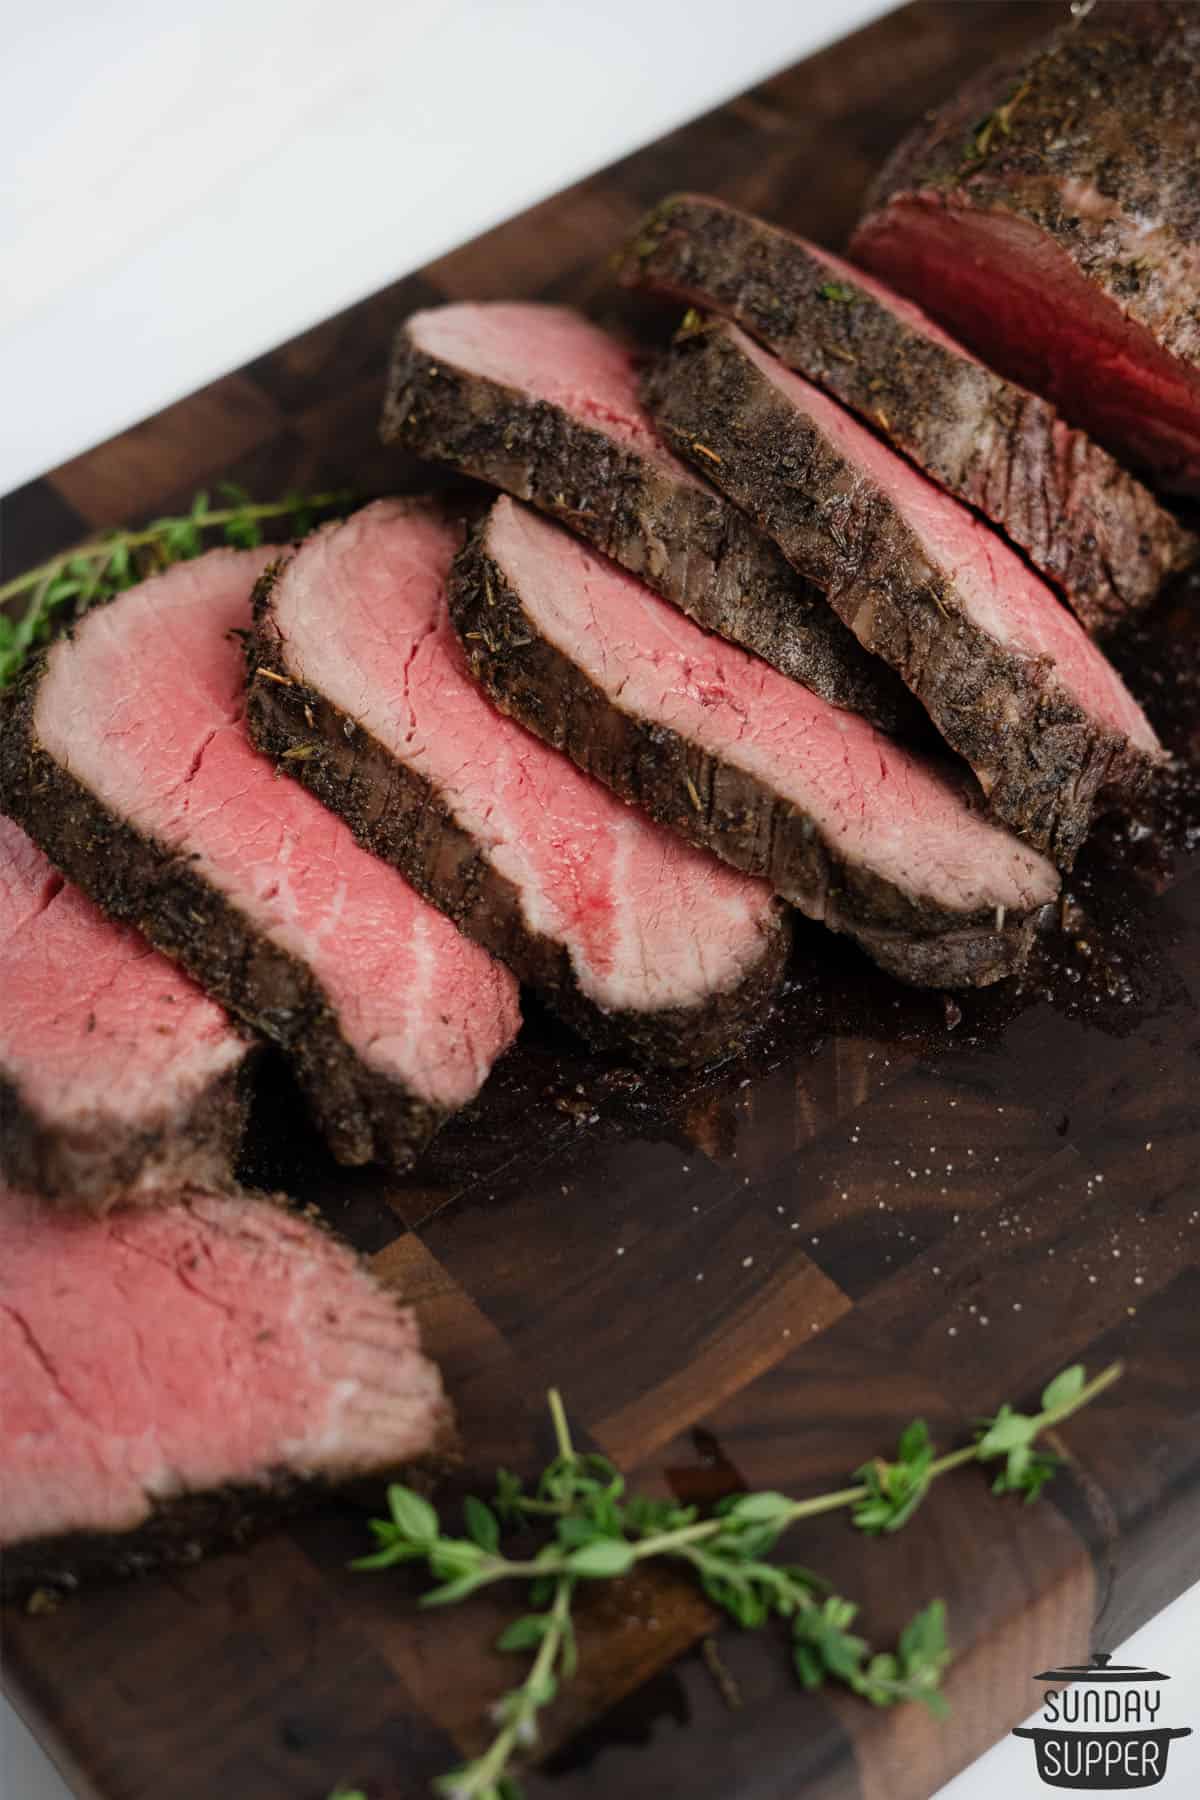 slices of beef tenderloin on a wood cutting board